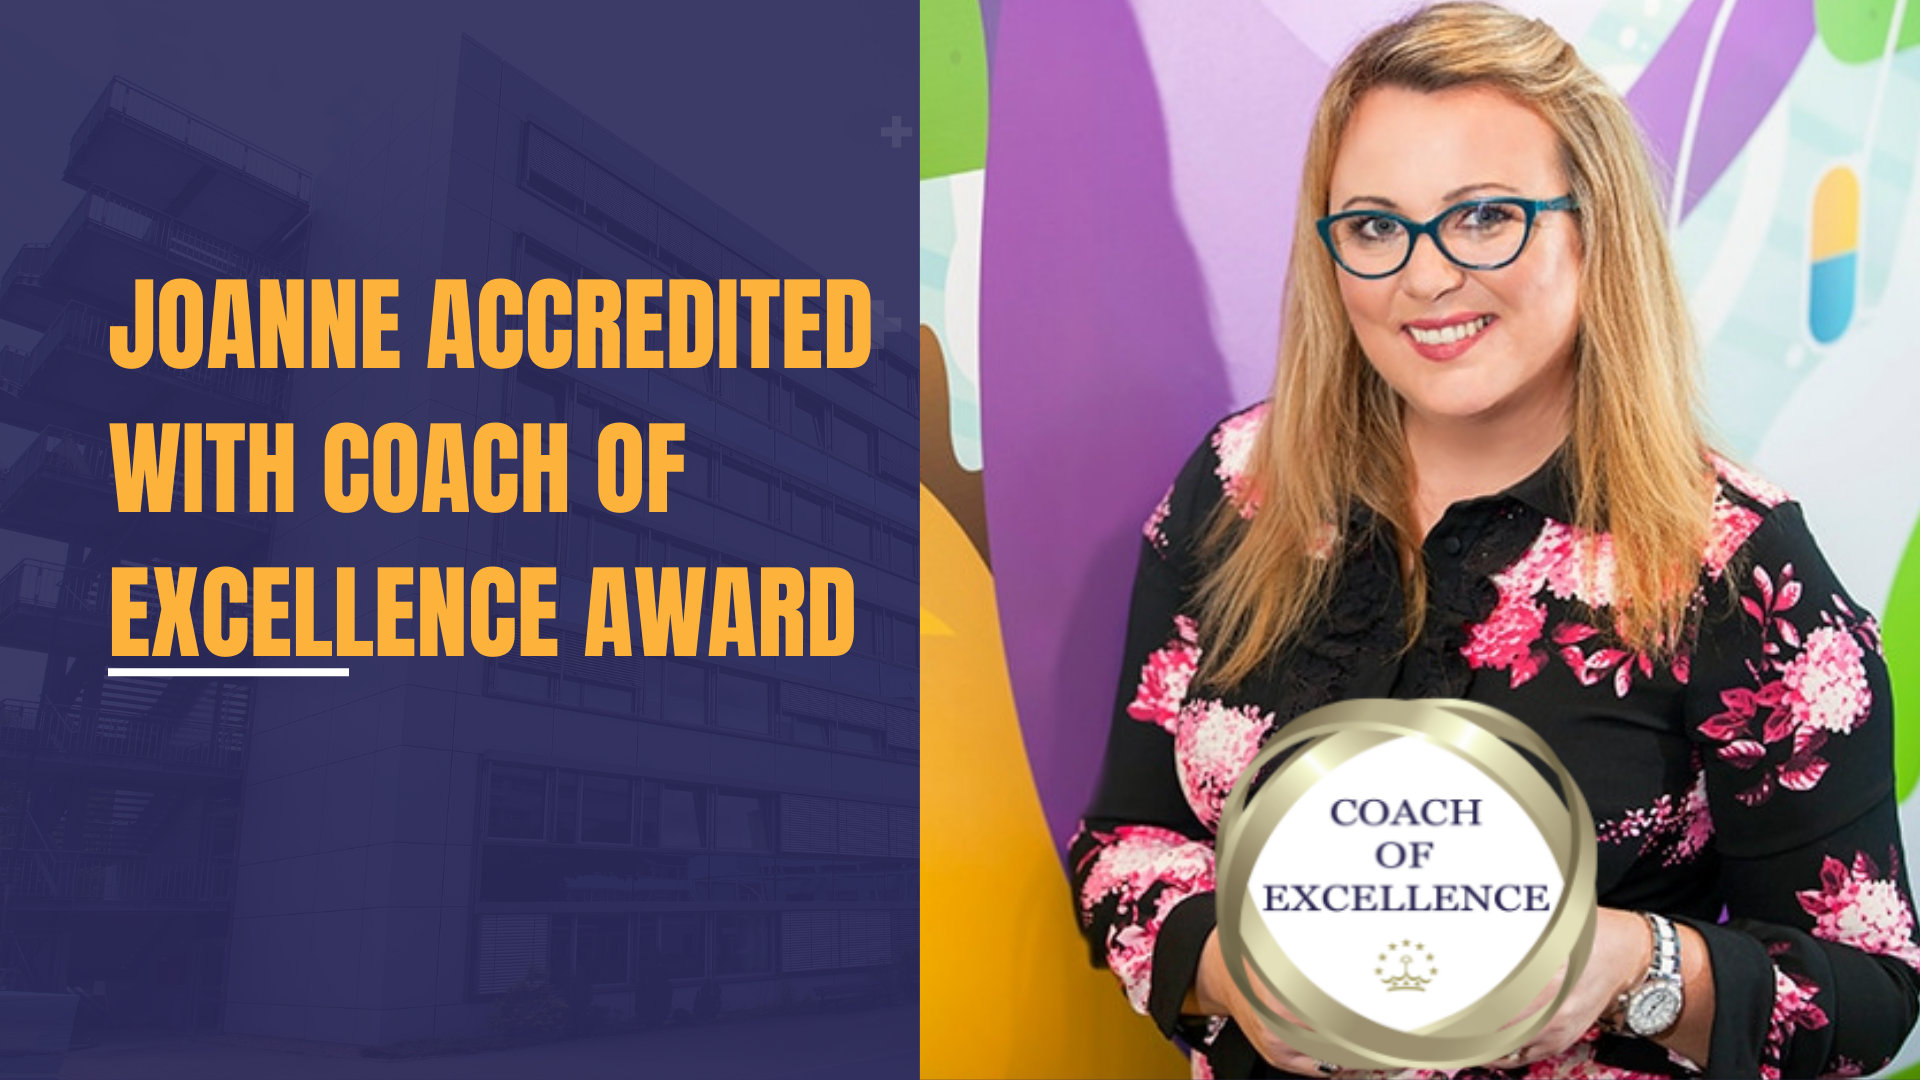 Coach of Excellence Accreditation for Joanne Sweeney